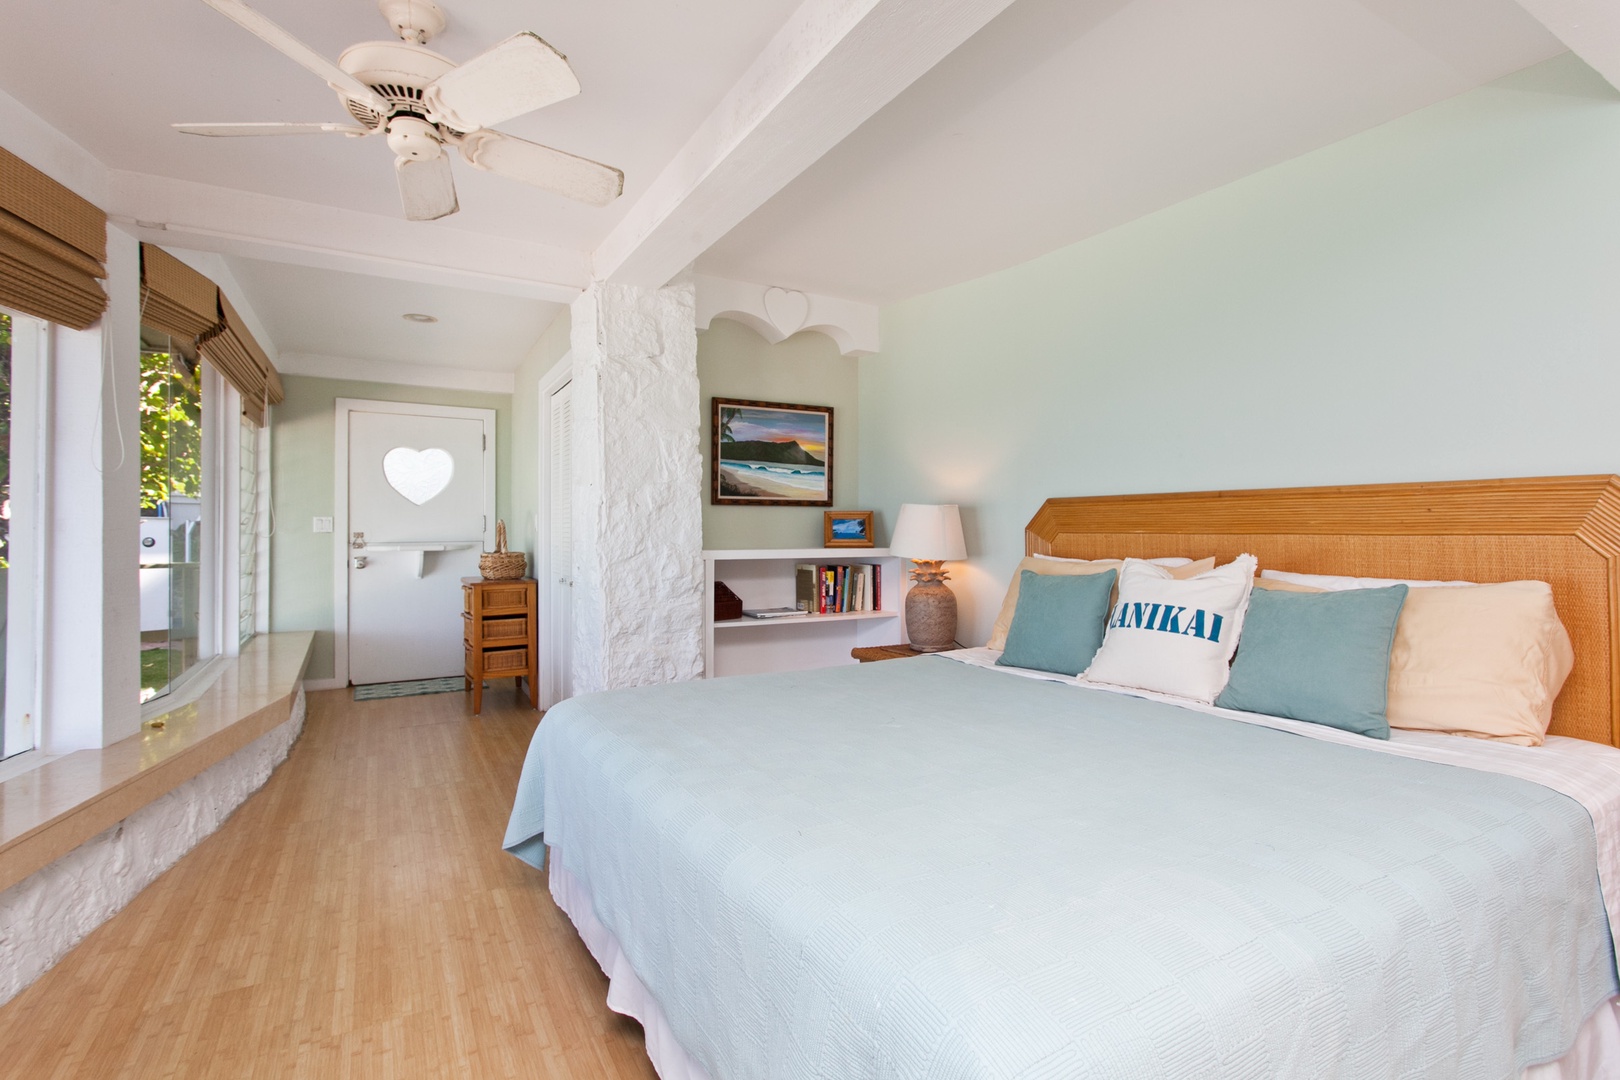 Kailua Vacation Rentals, Lanikai Village* - Hale Kainalu: The primary suite has a king bed, ceiling fan and king bed for a relaxing night.